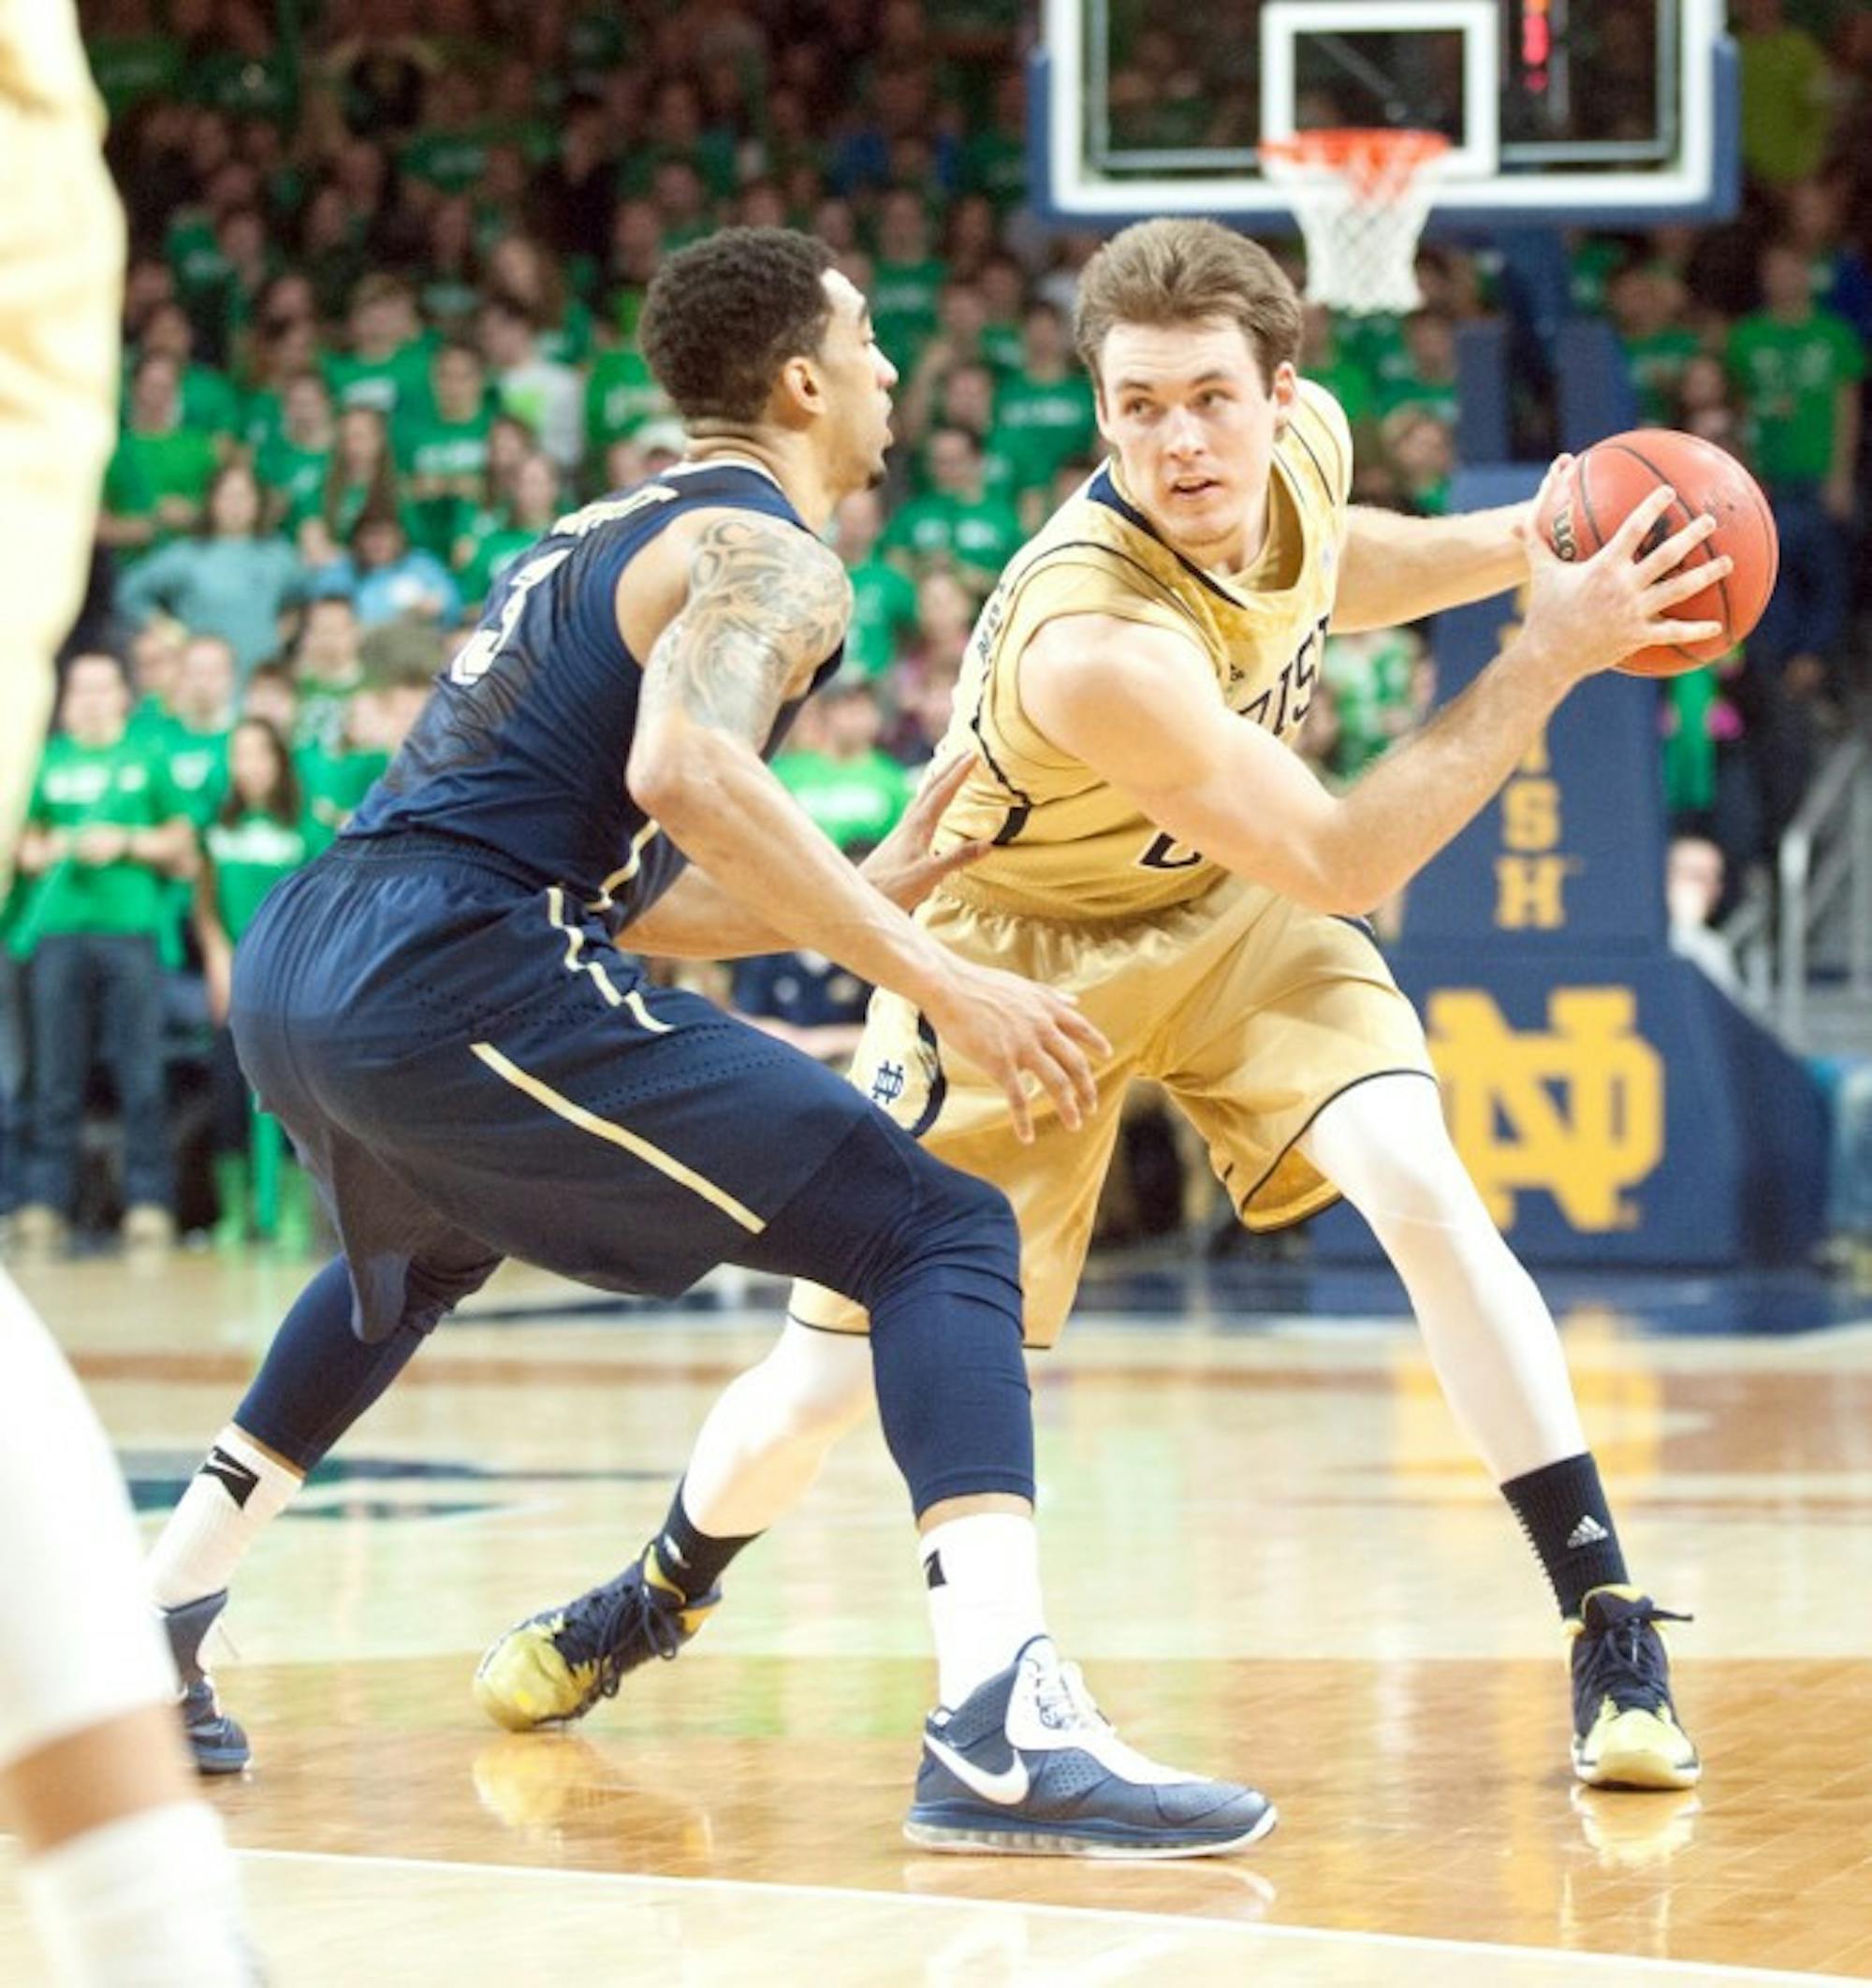 Irish senior/guard forward Pat Connaughton fakes out a Panther defender during Notre Dame's 85-81 loss to Pittsburgh on March 3.